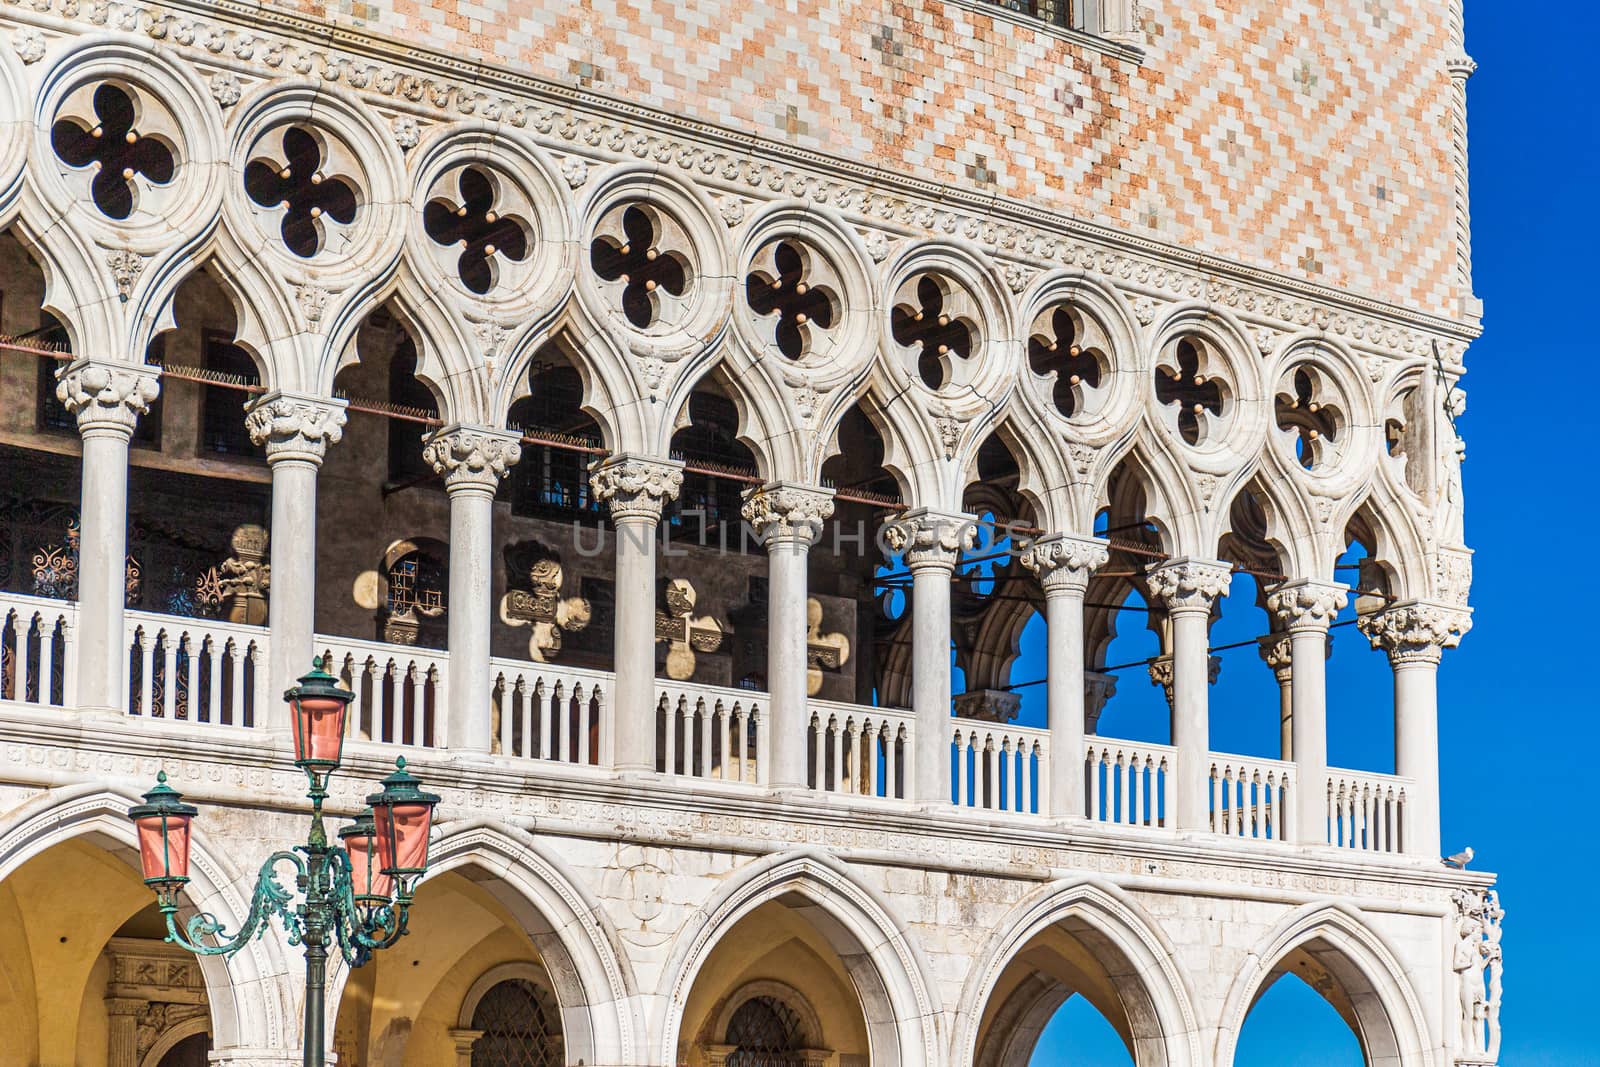 Detail of the Doge's Palace "Palazzo Ducale" in Venice, Italy by COffe